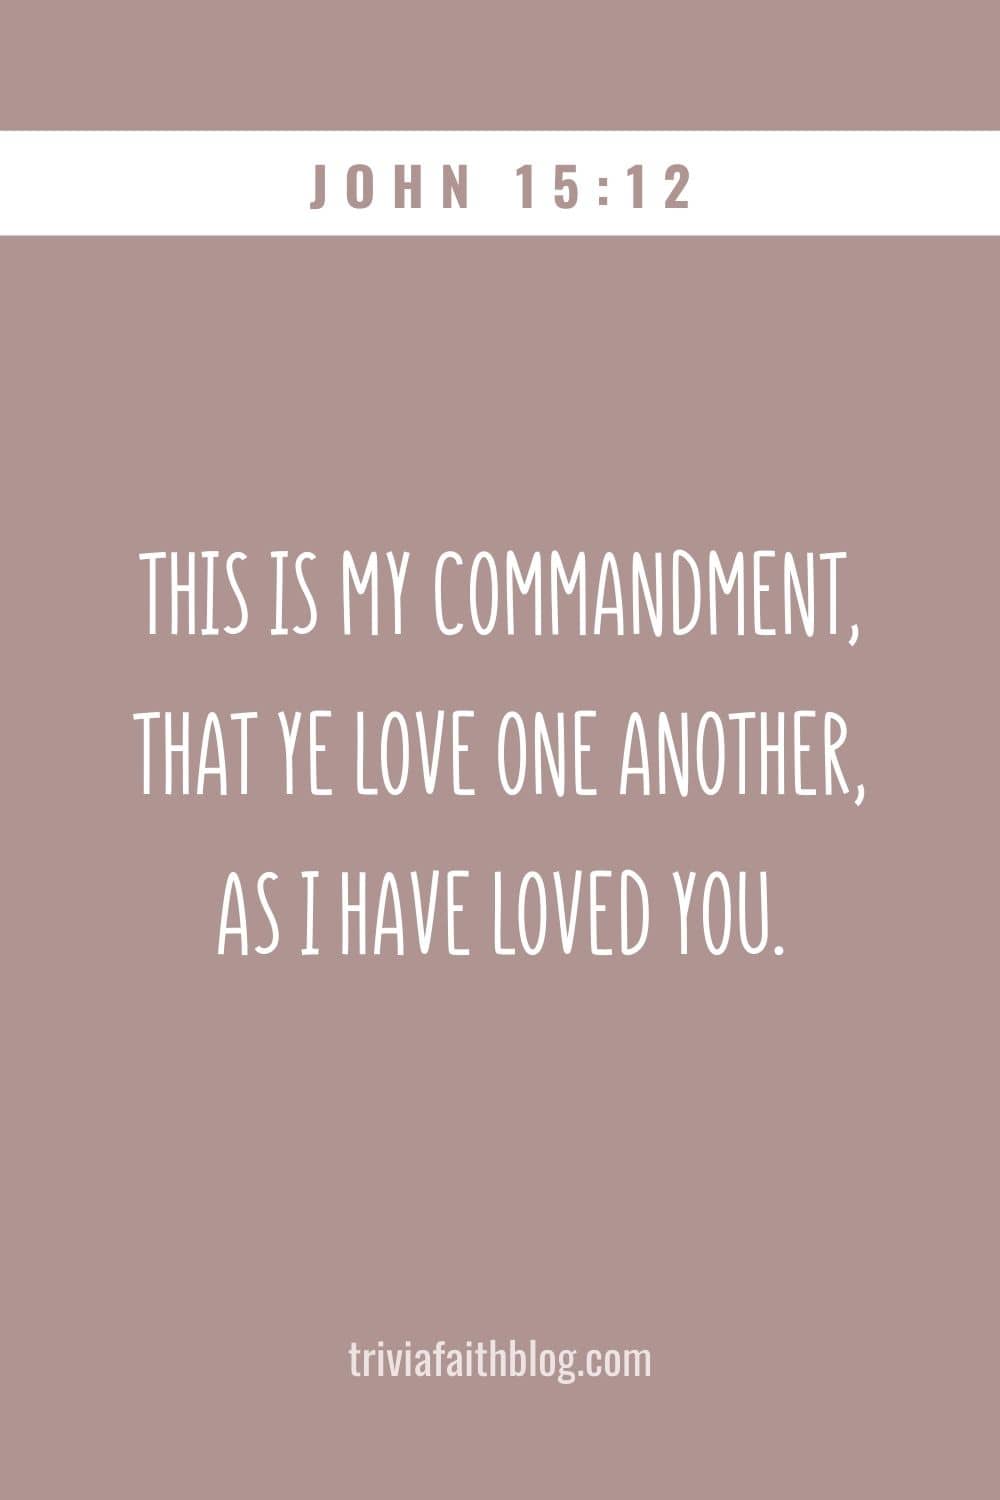 This is my commandment, That ye love one another, as I have loved you